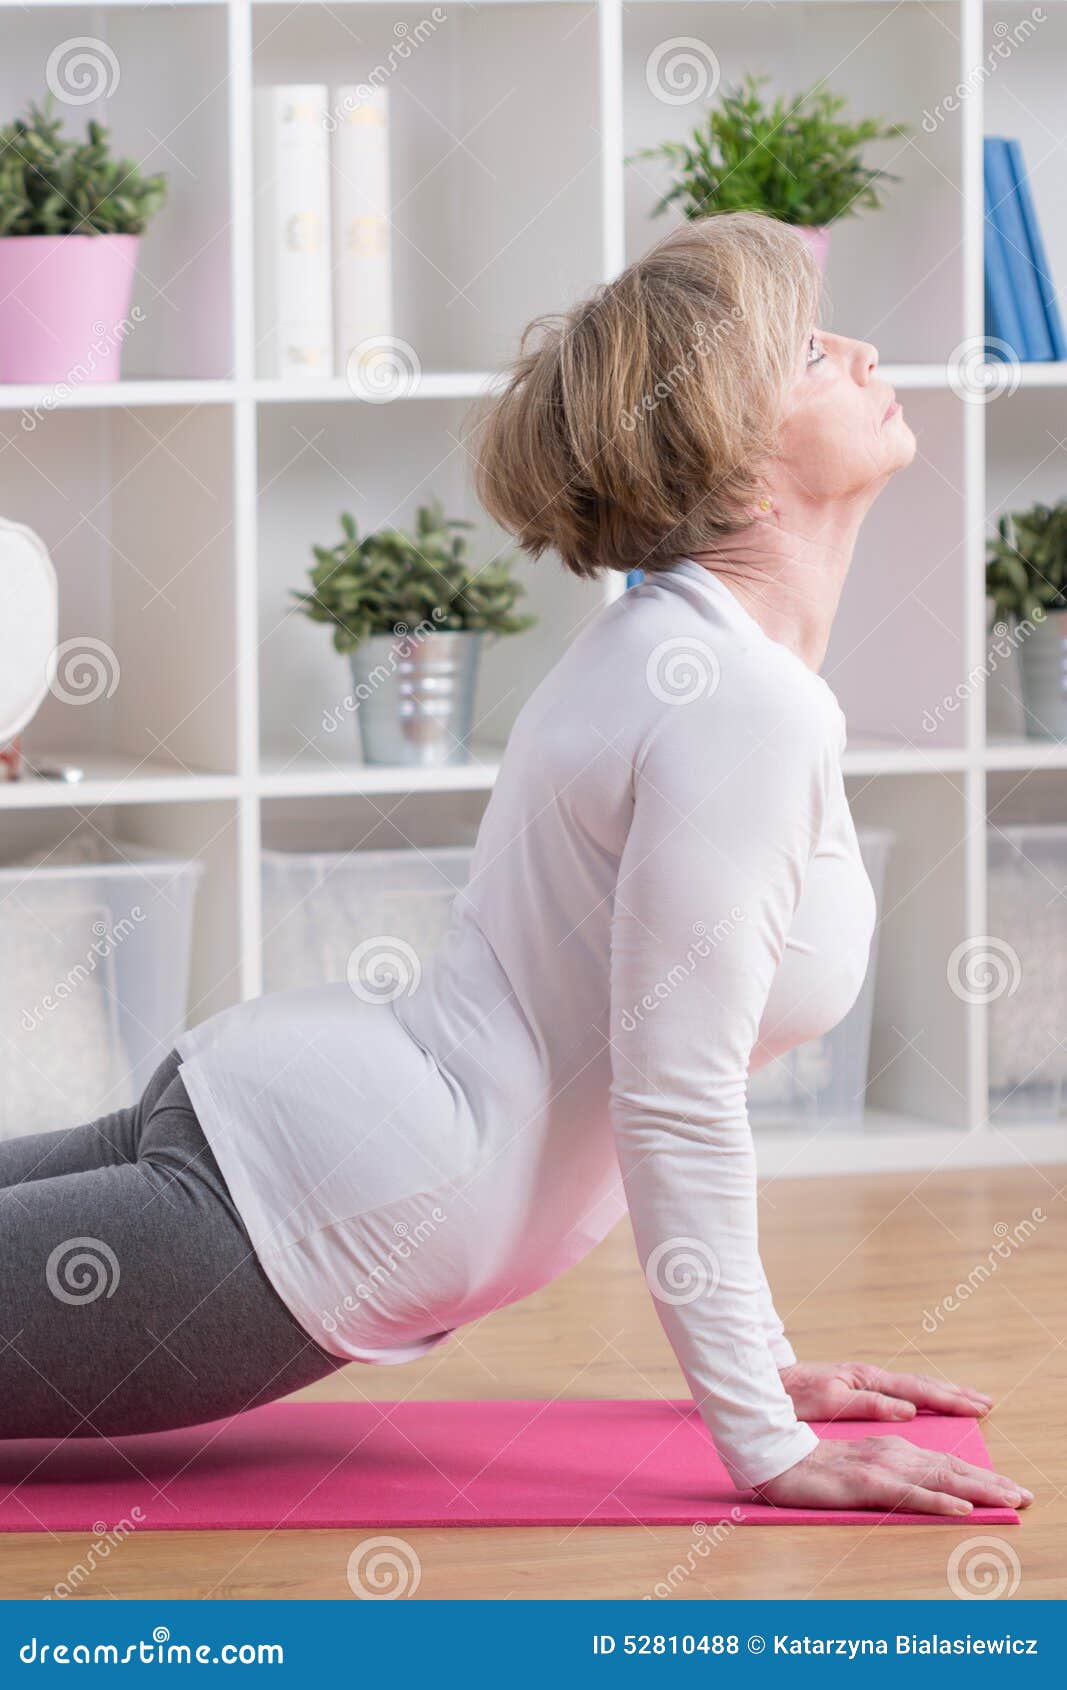 middle-aged woman doing yoga - Stock Image - F003/8654 - Science Photo  Library